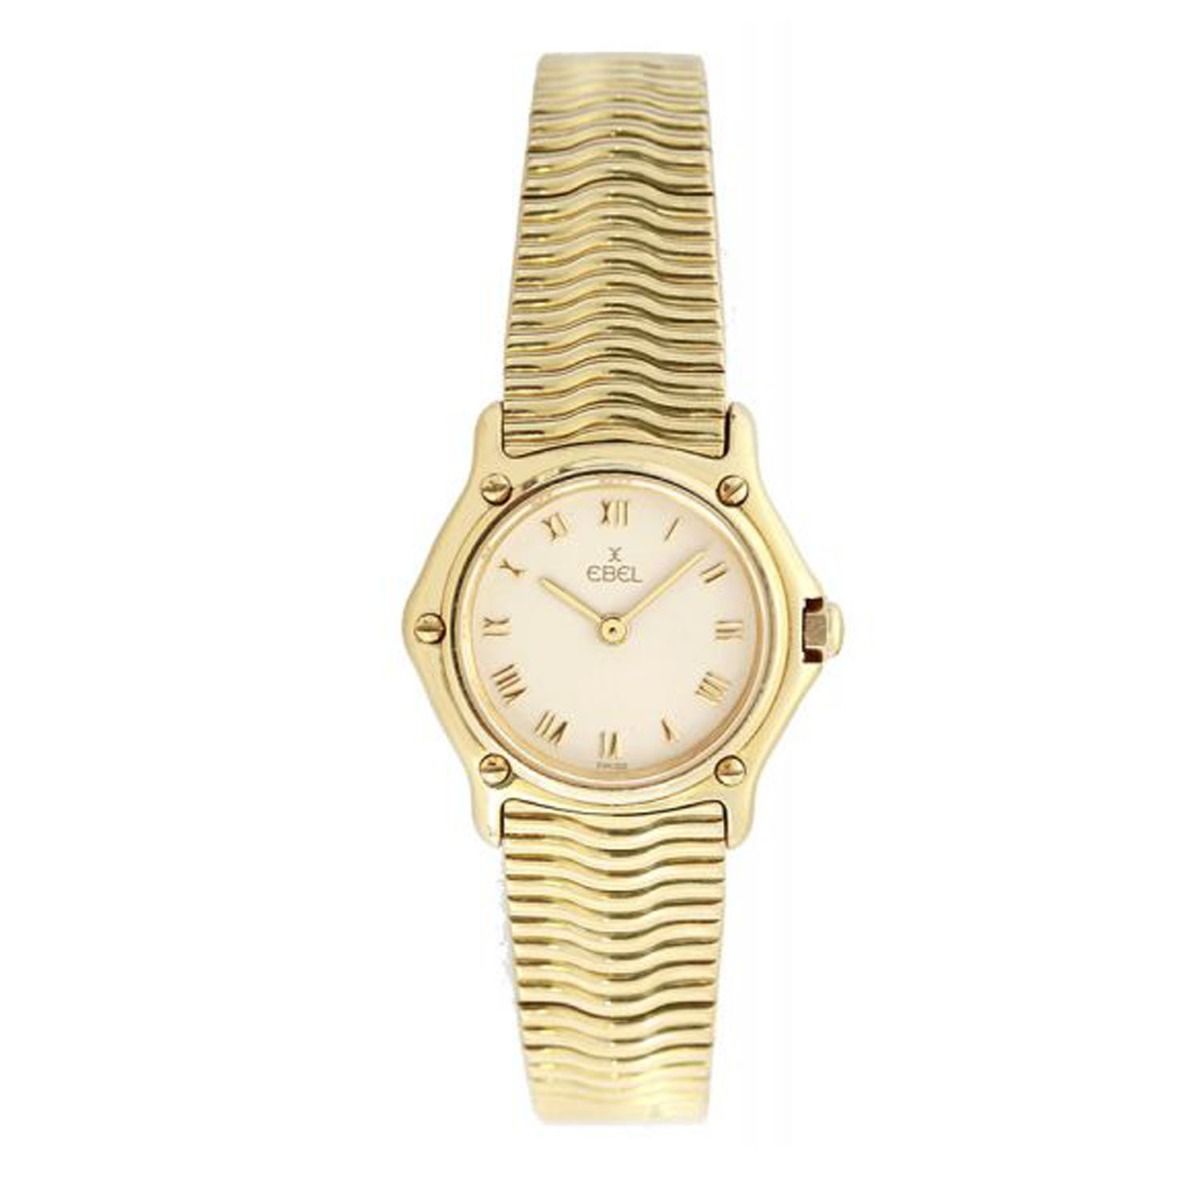 Ebel 1911 Classic Wave 18k Gold Watch